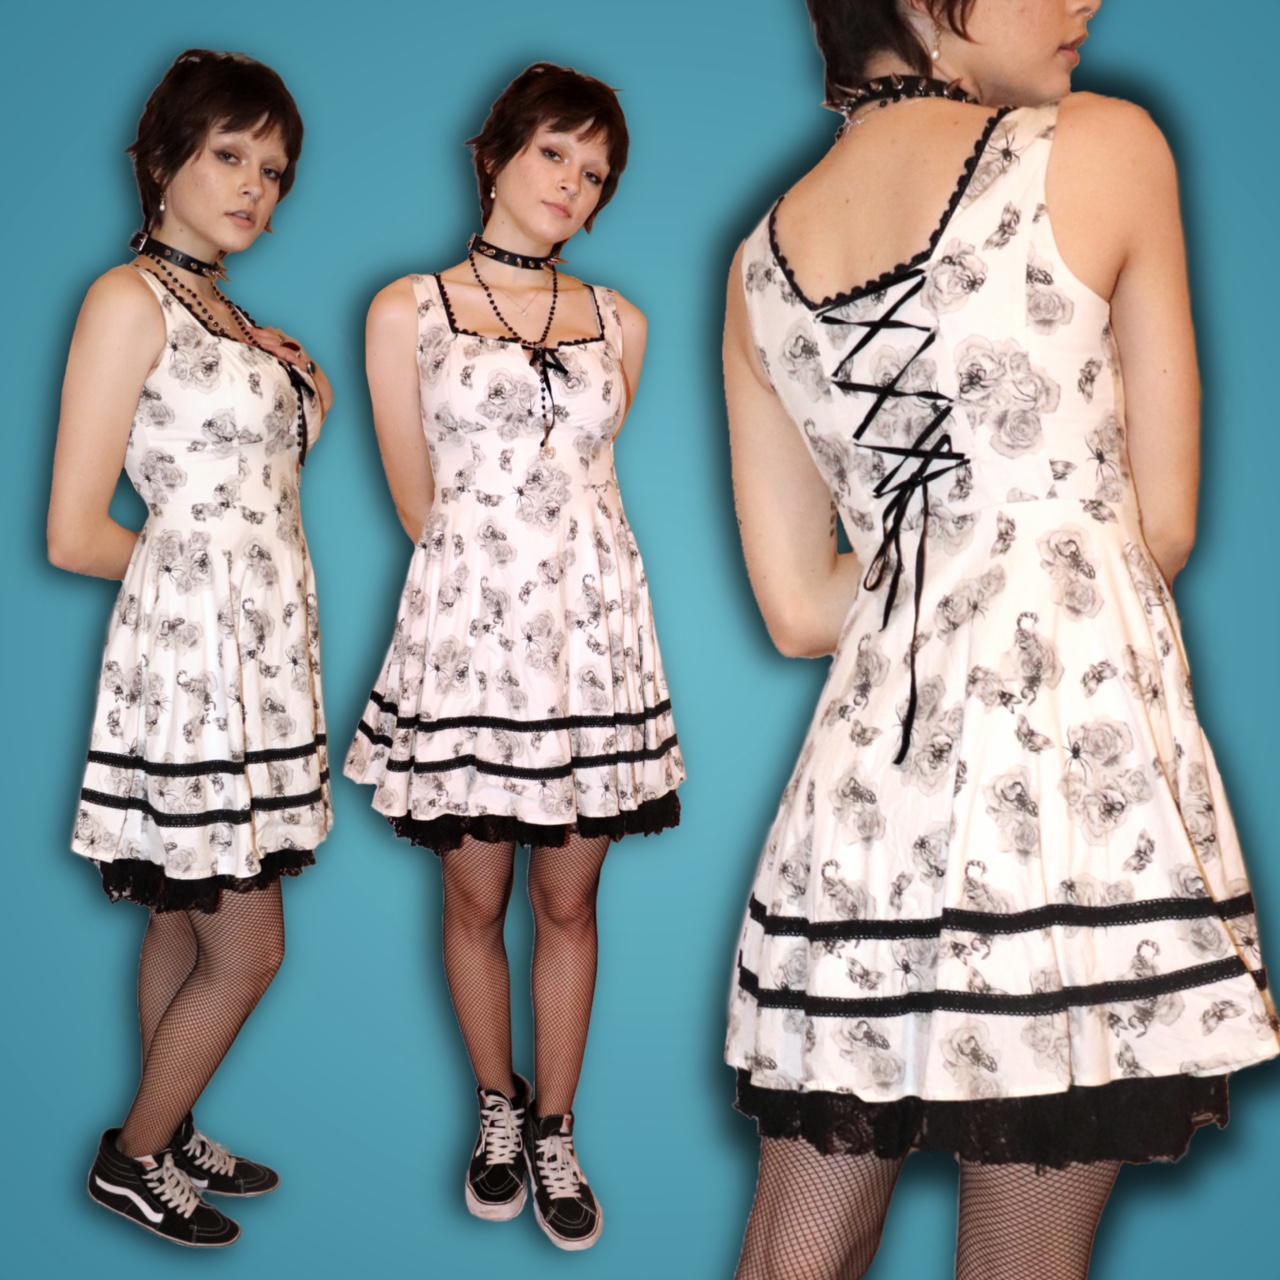 Product Image 2 - 🌹HOT TOPIC DRESS🌹
❤︎ you'll look